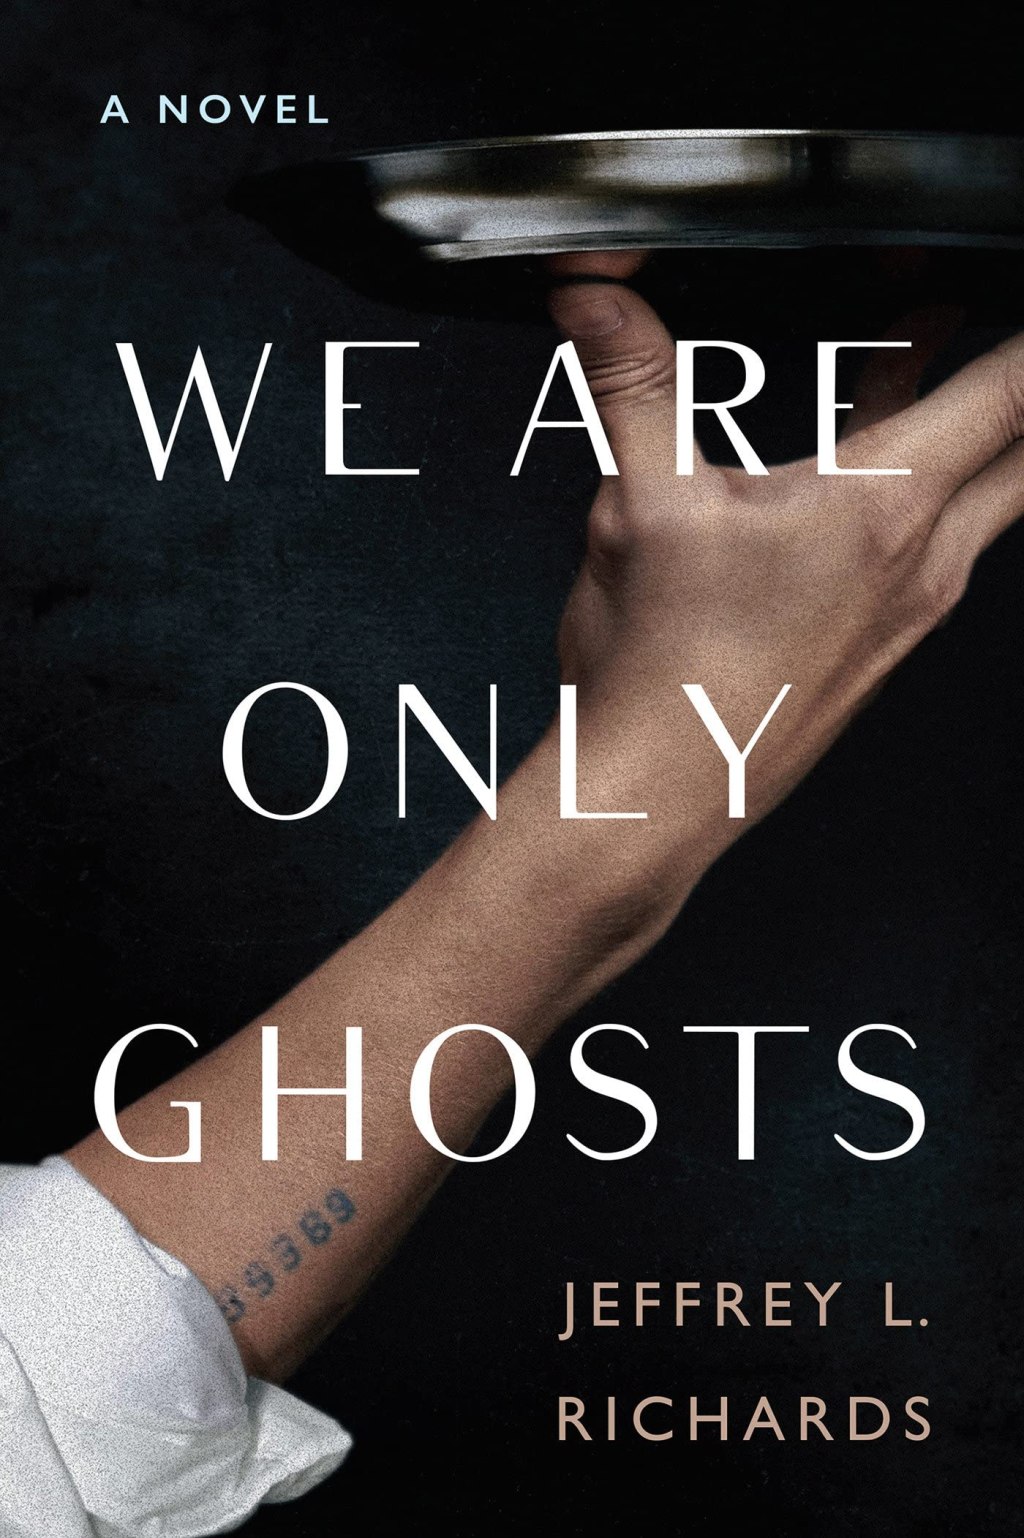 5 star reads: “We Are Only Ghosts” by Jeffrey L. Richards